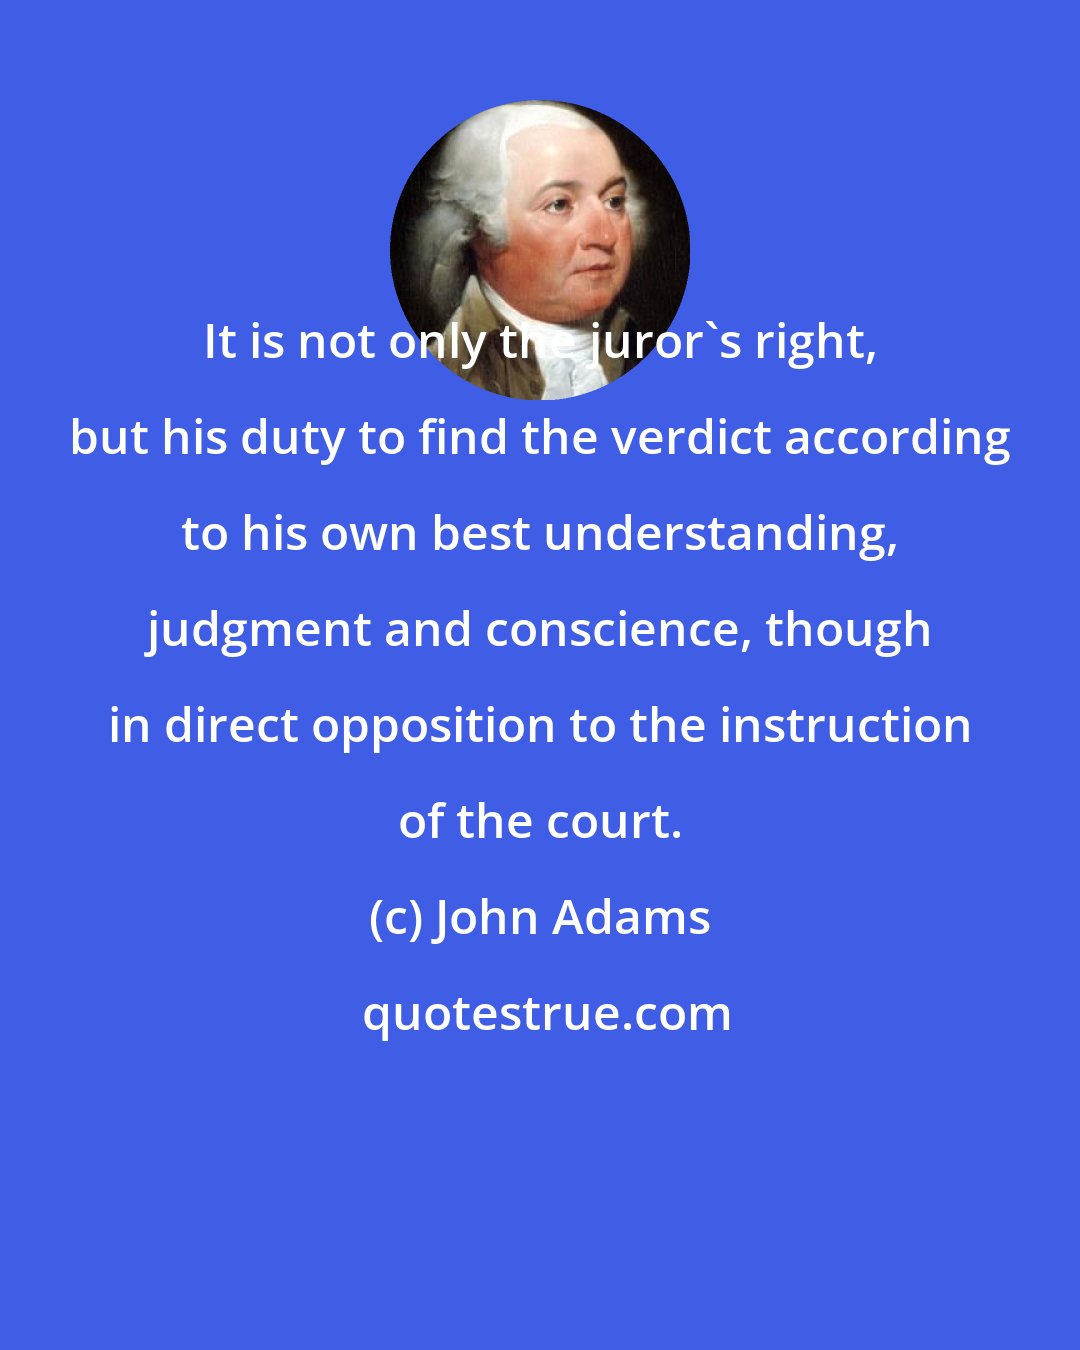 John Adams: It is not only the juror's right, but his duty to find the verdict according to his own best understanding, judgment and conscience, though in direct opposition to the instruction of the court.